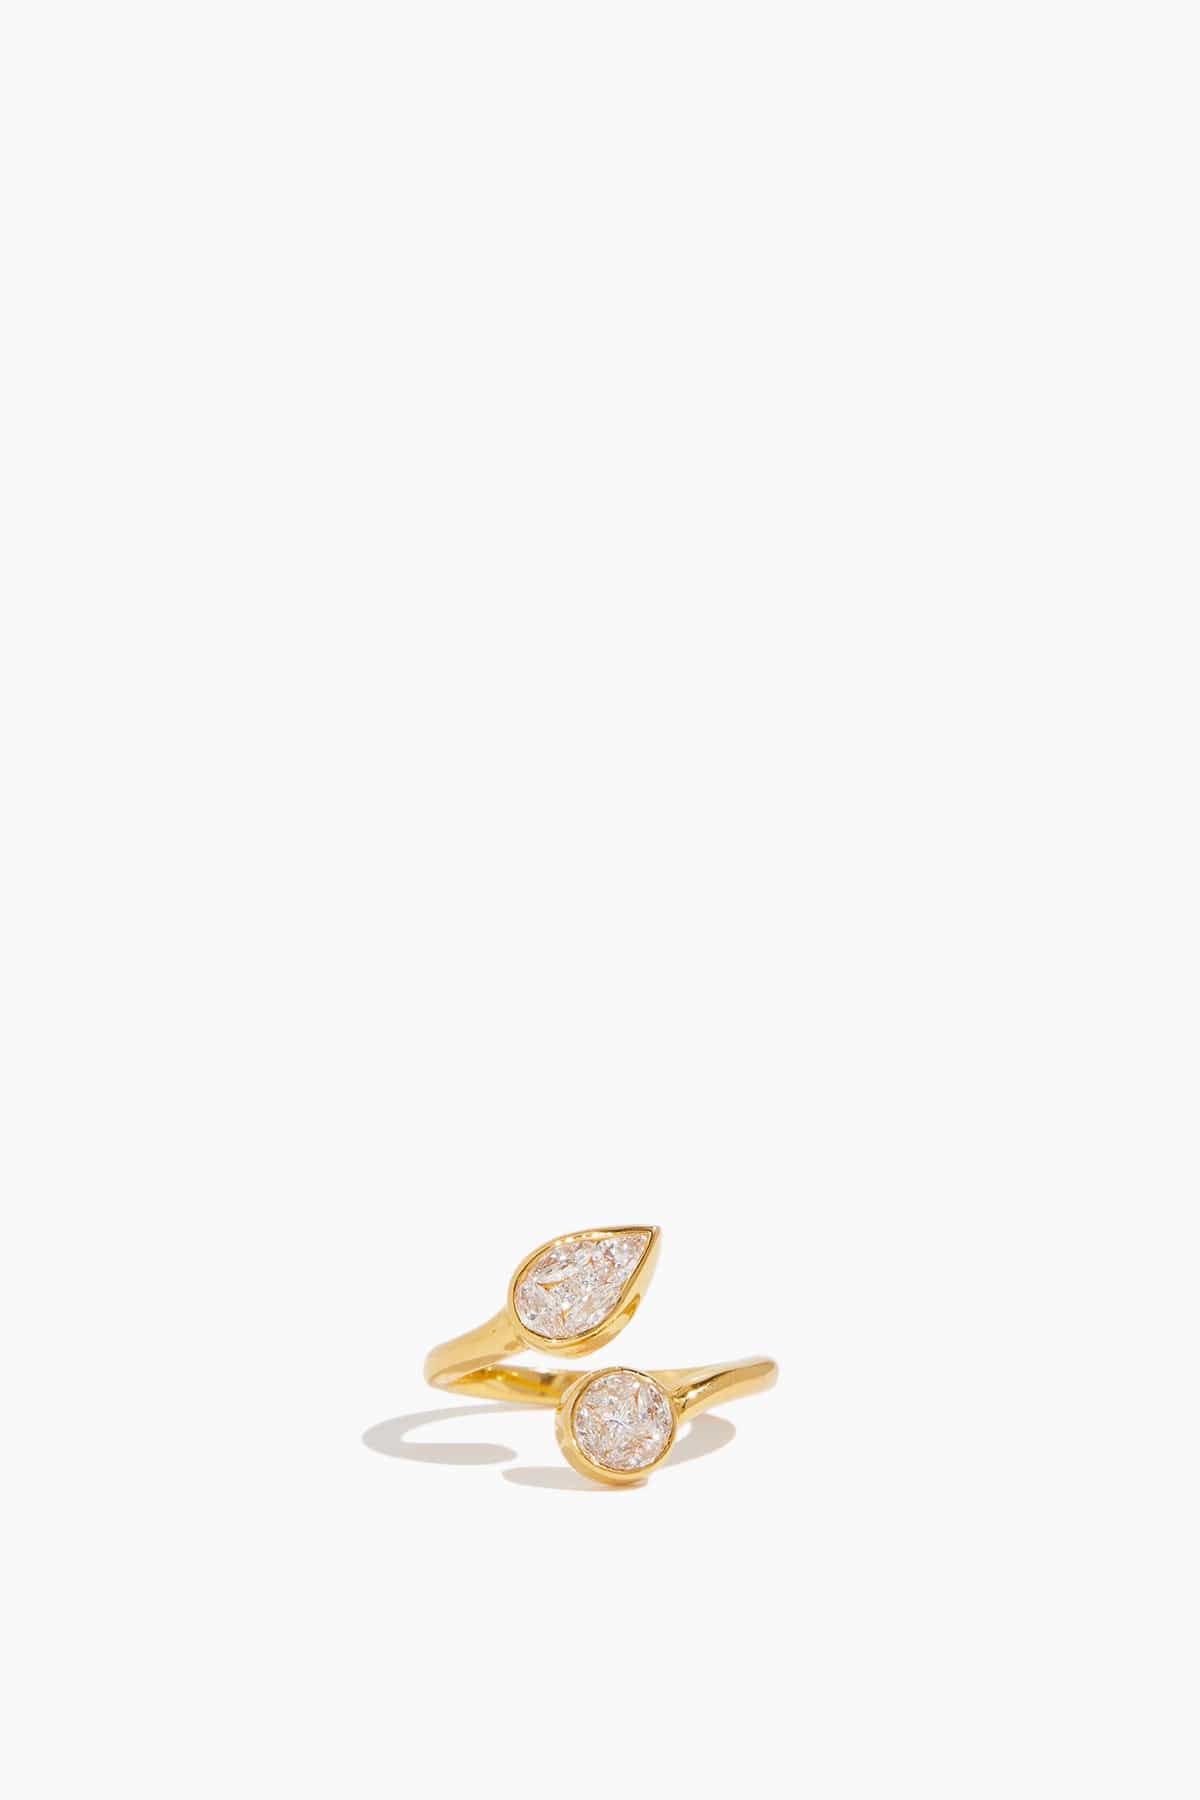 Stoned Fine Jewelry Rings Wrapped Leaf Ring in 18k Yellow Gold